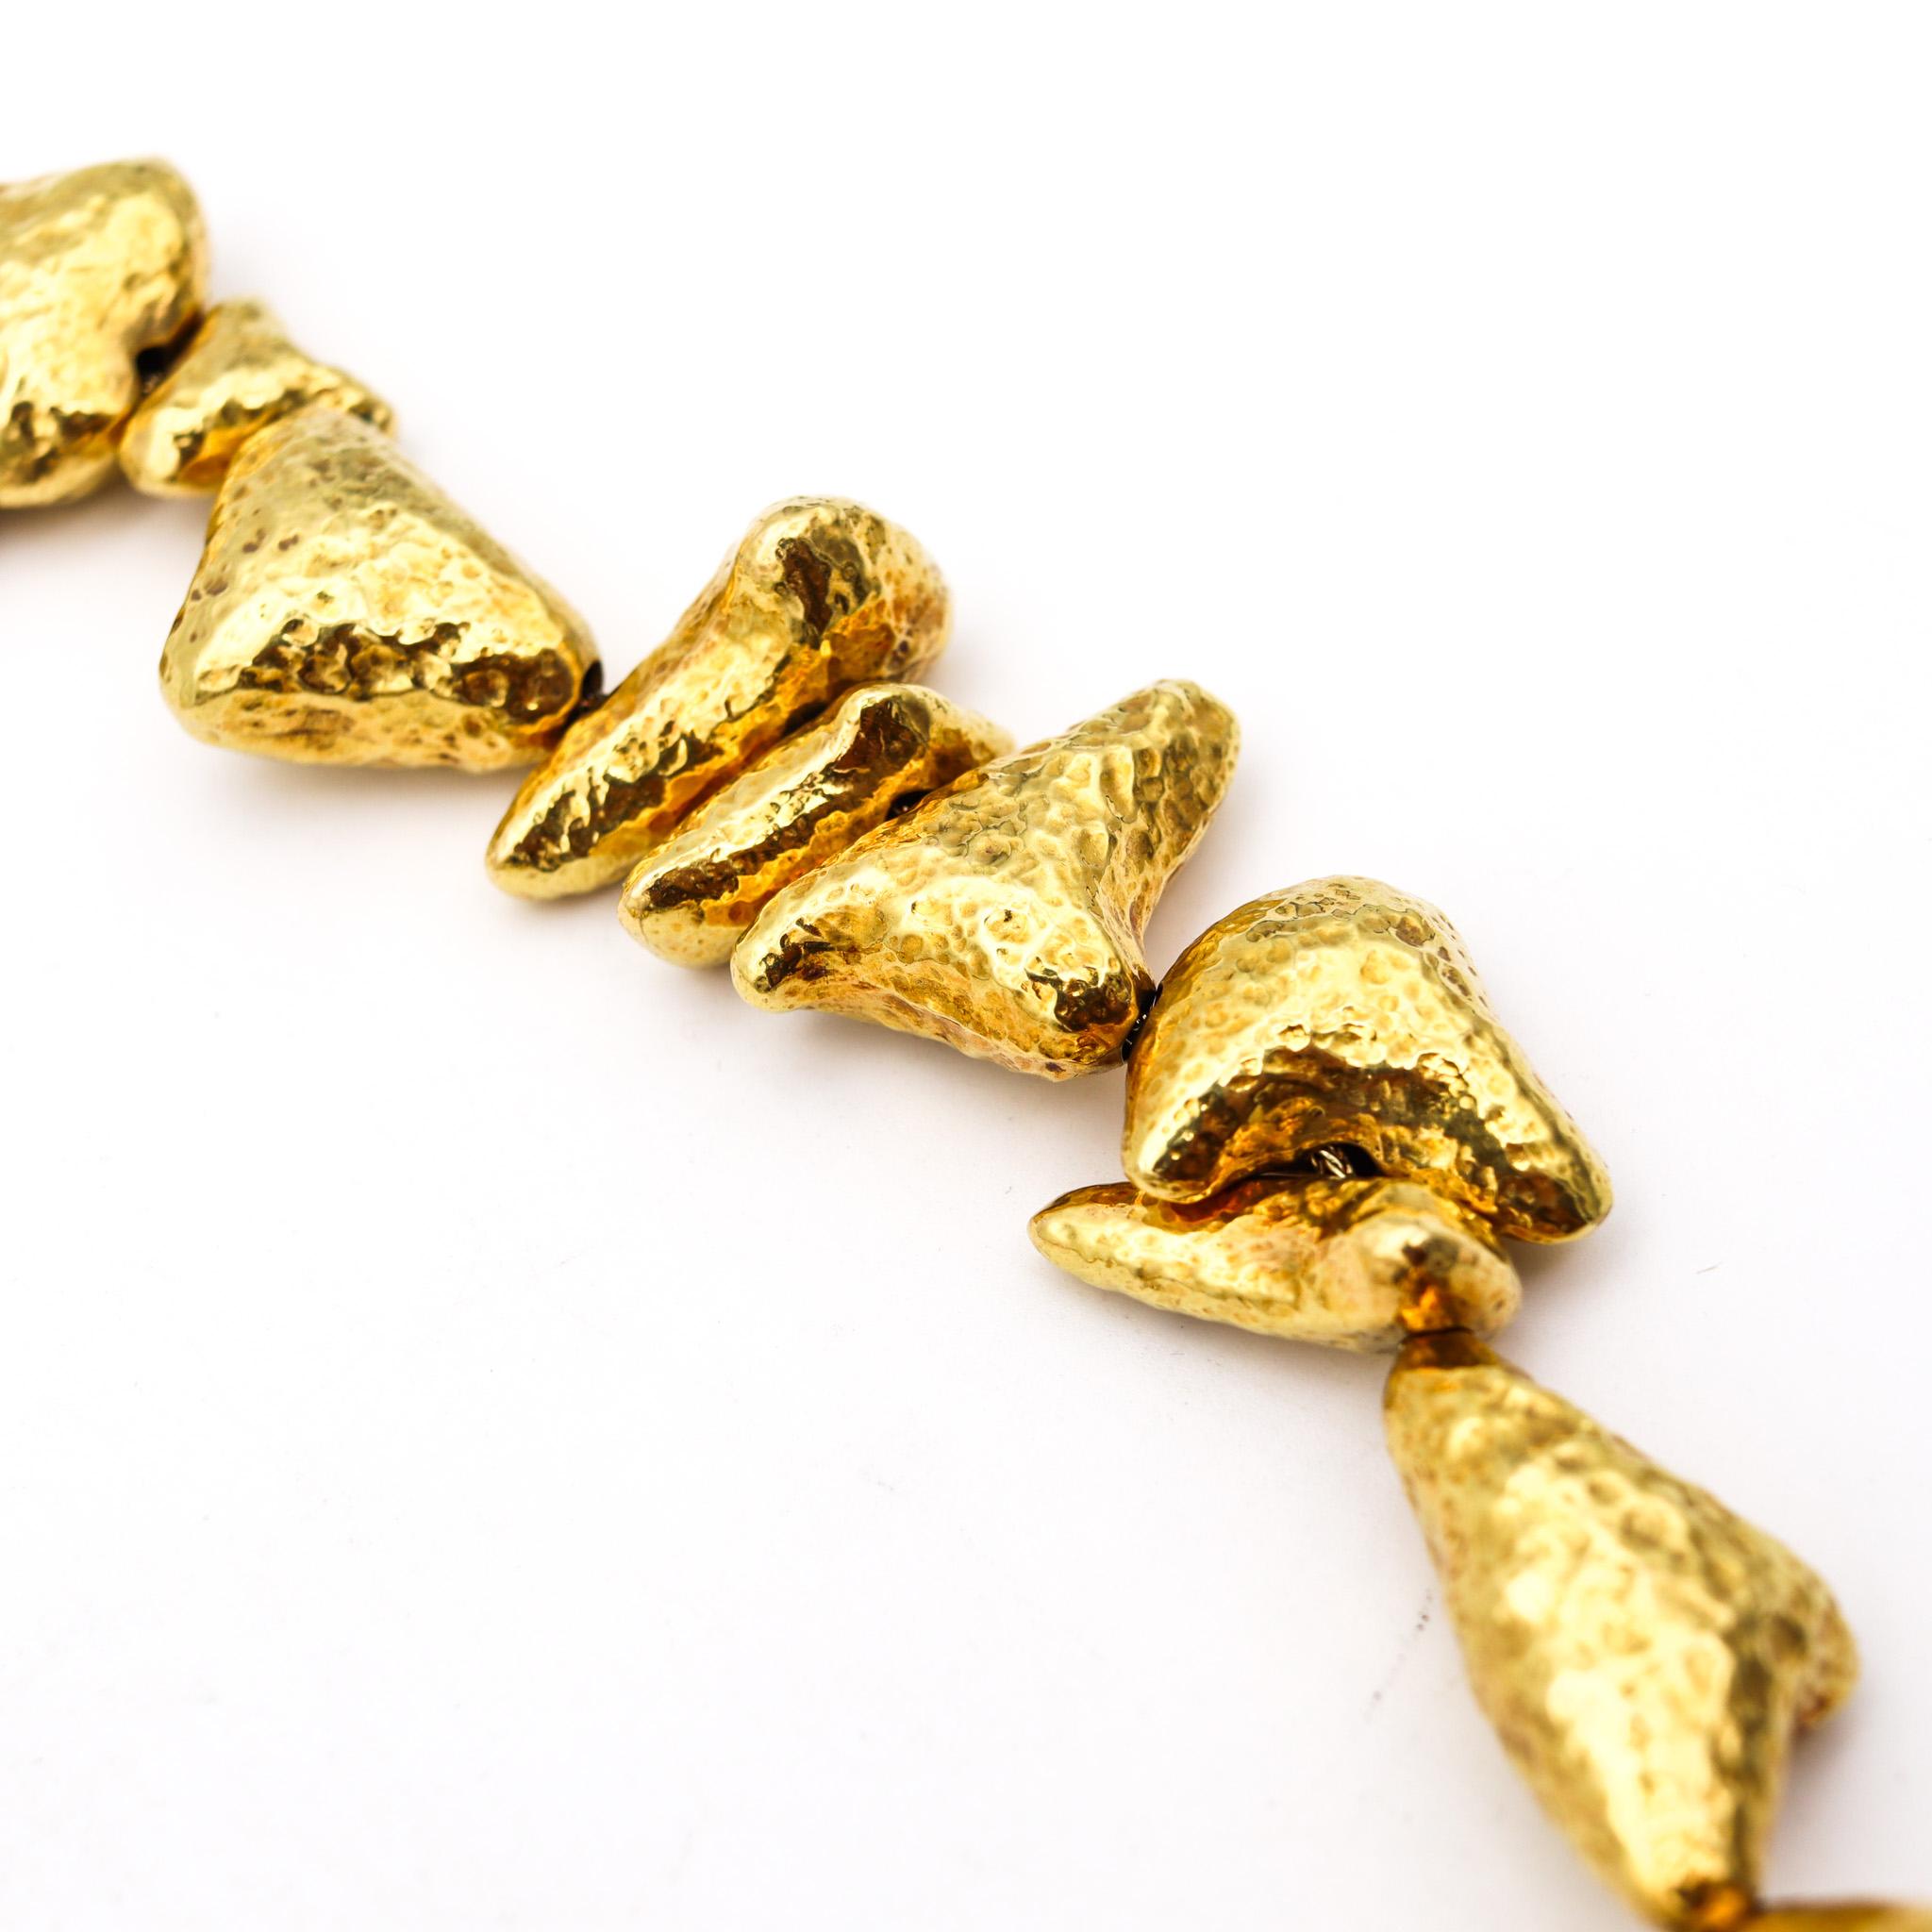 Modernist Zolotas Greek Nugget Necklace Collar In Textured solid 18Kt Yellow Gold